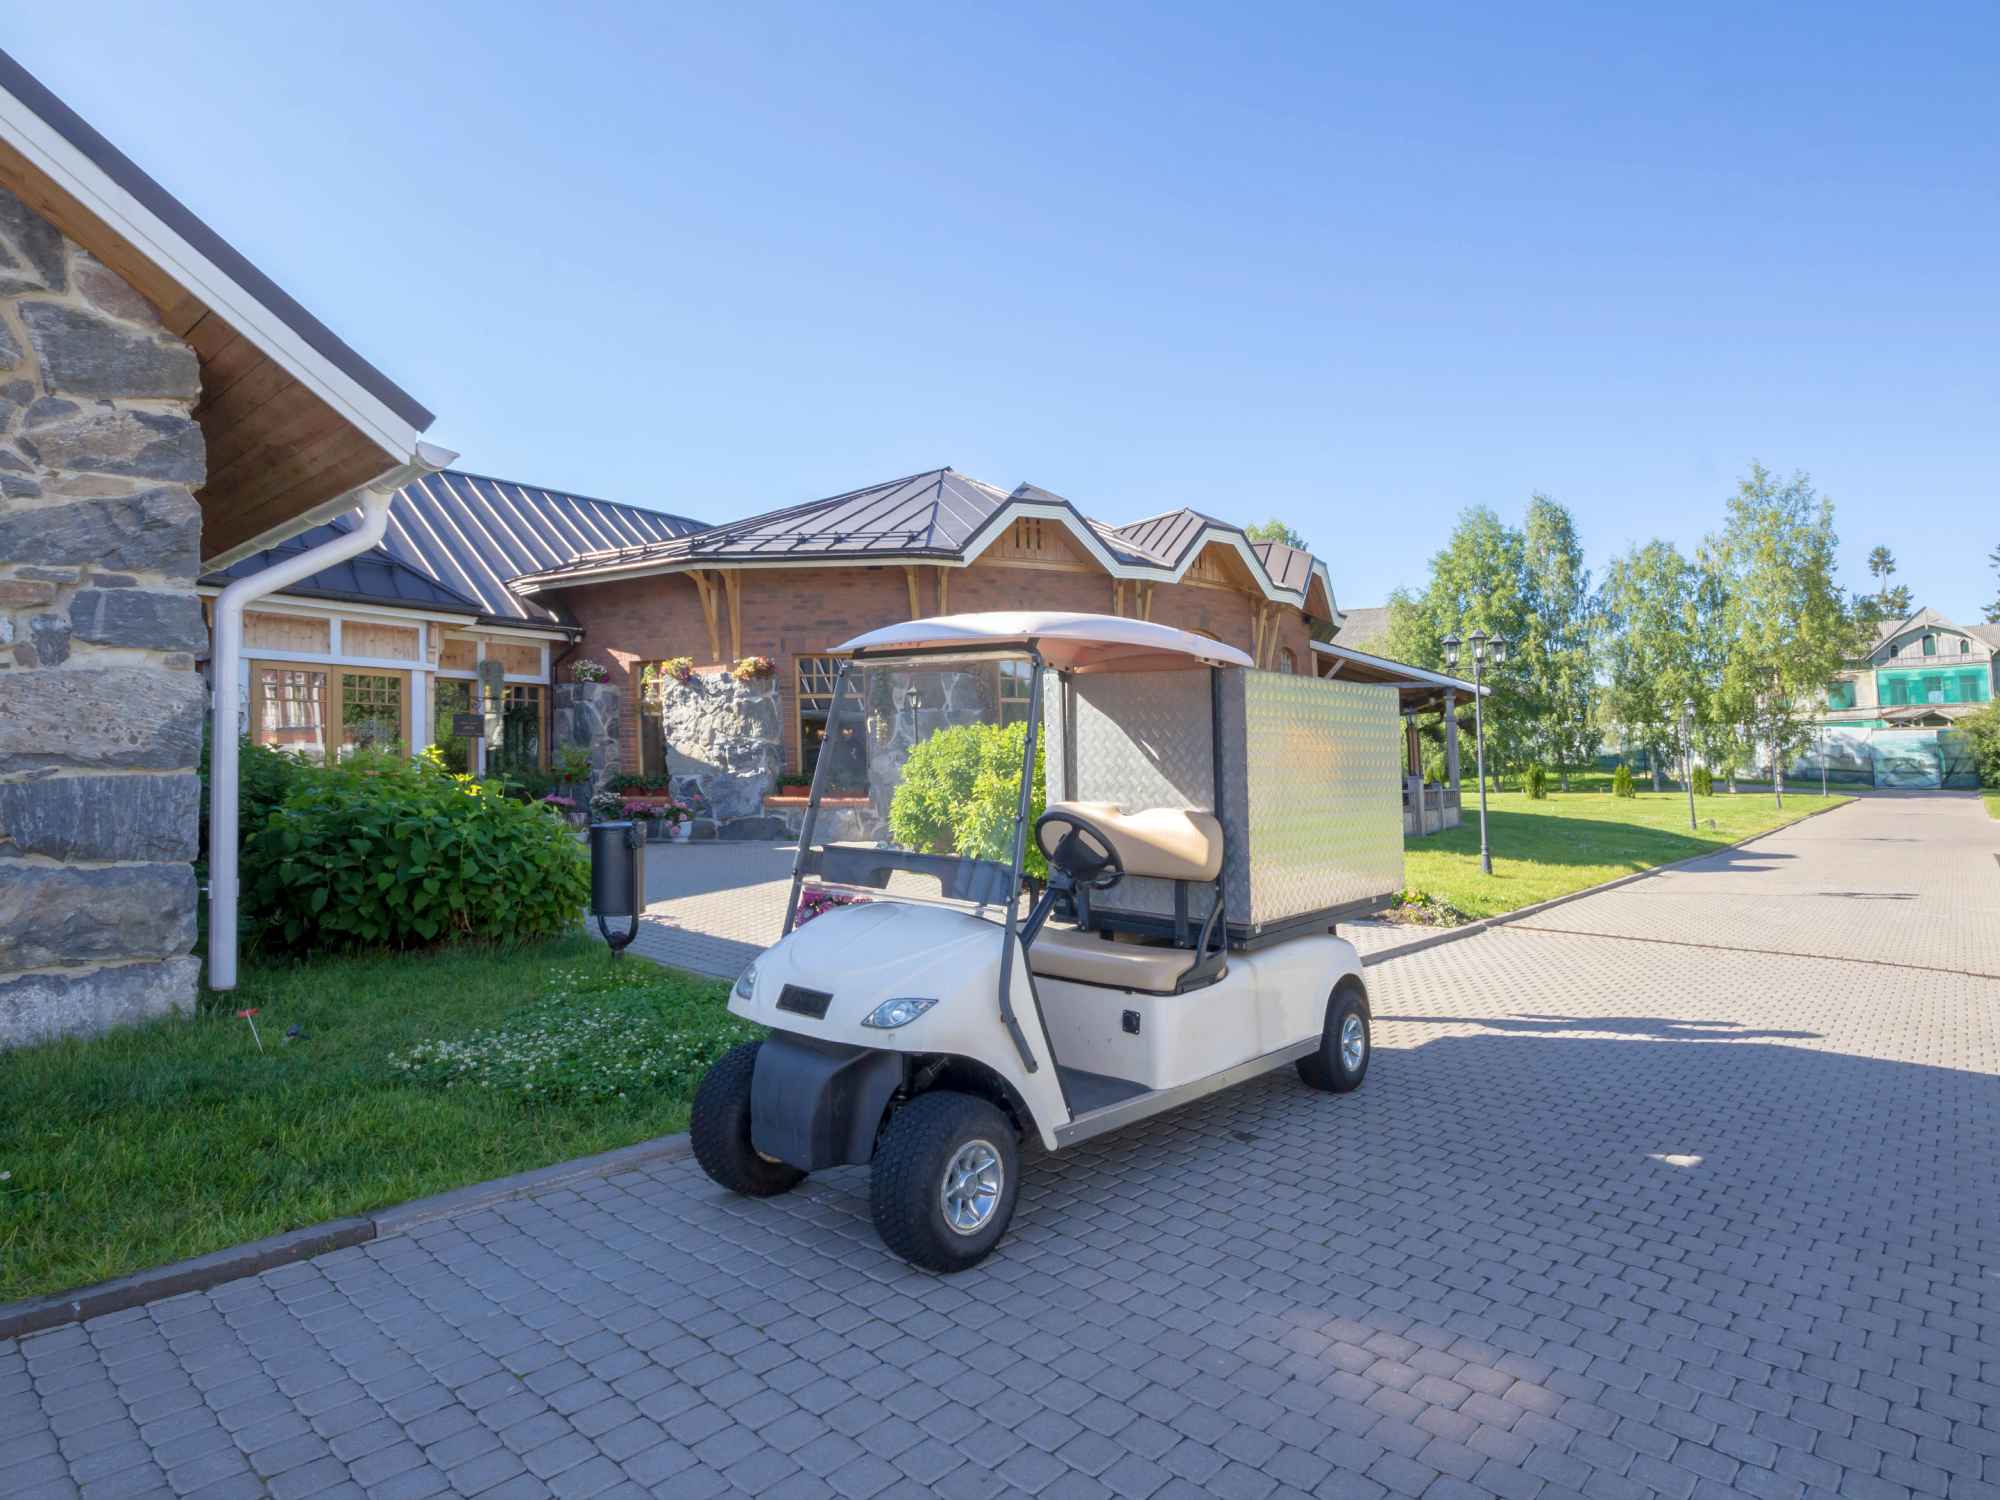 A white golf cart is parked in front of a house in a residential area. The cart is in the shade to protect it from the sun.